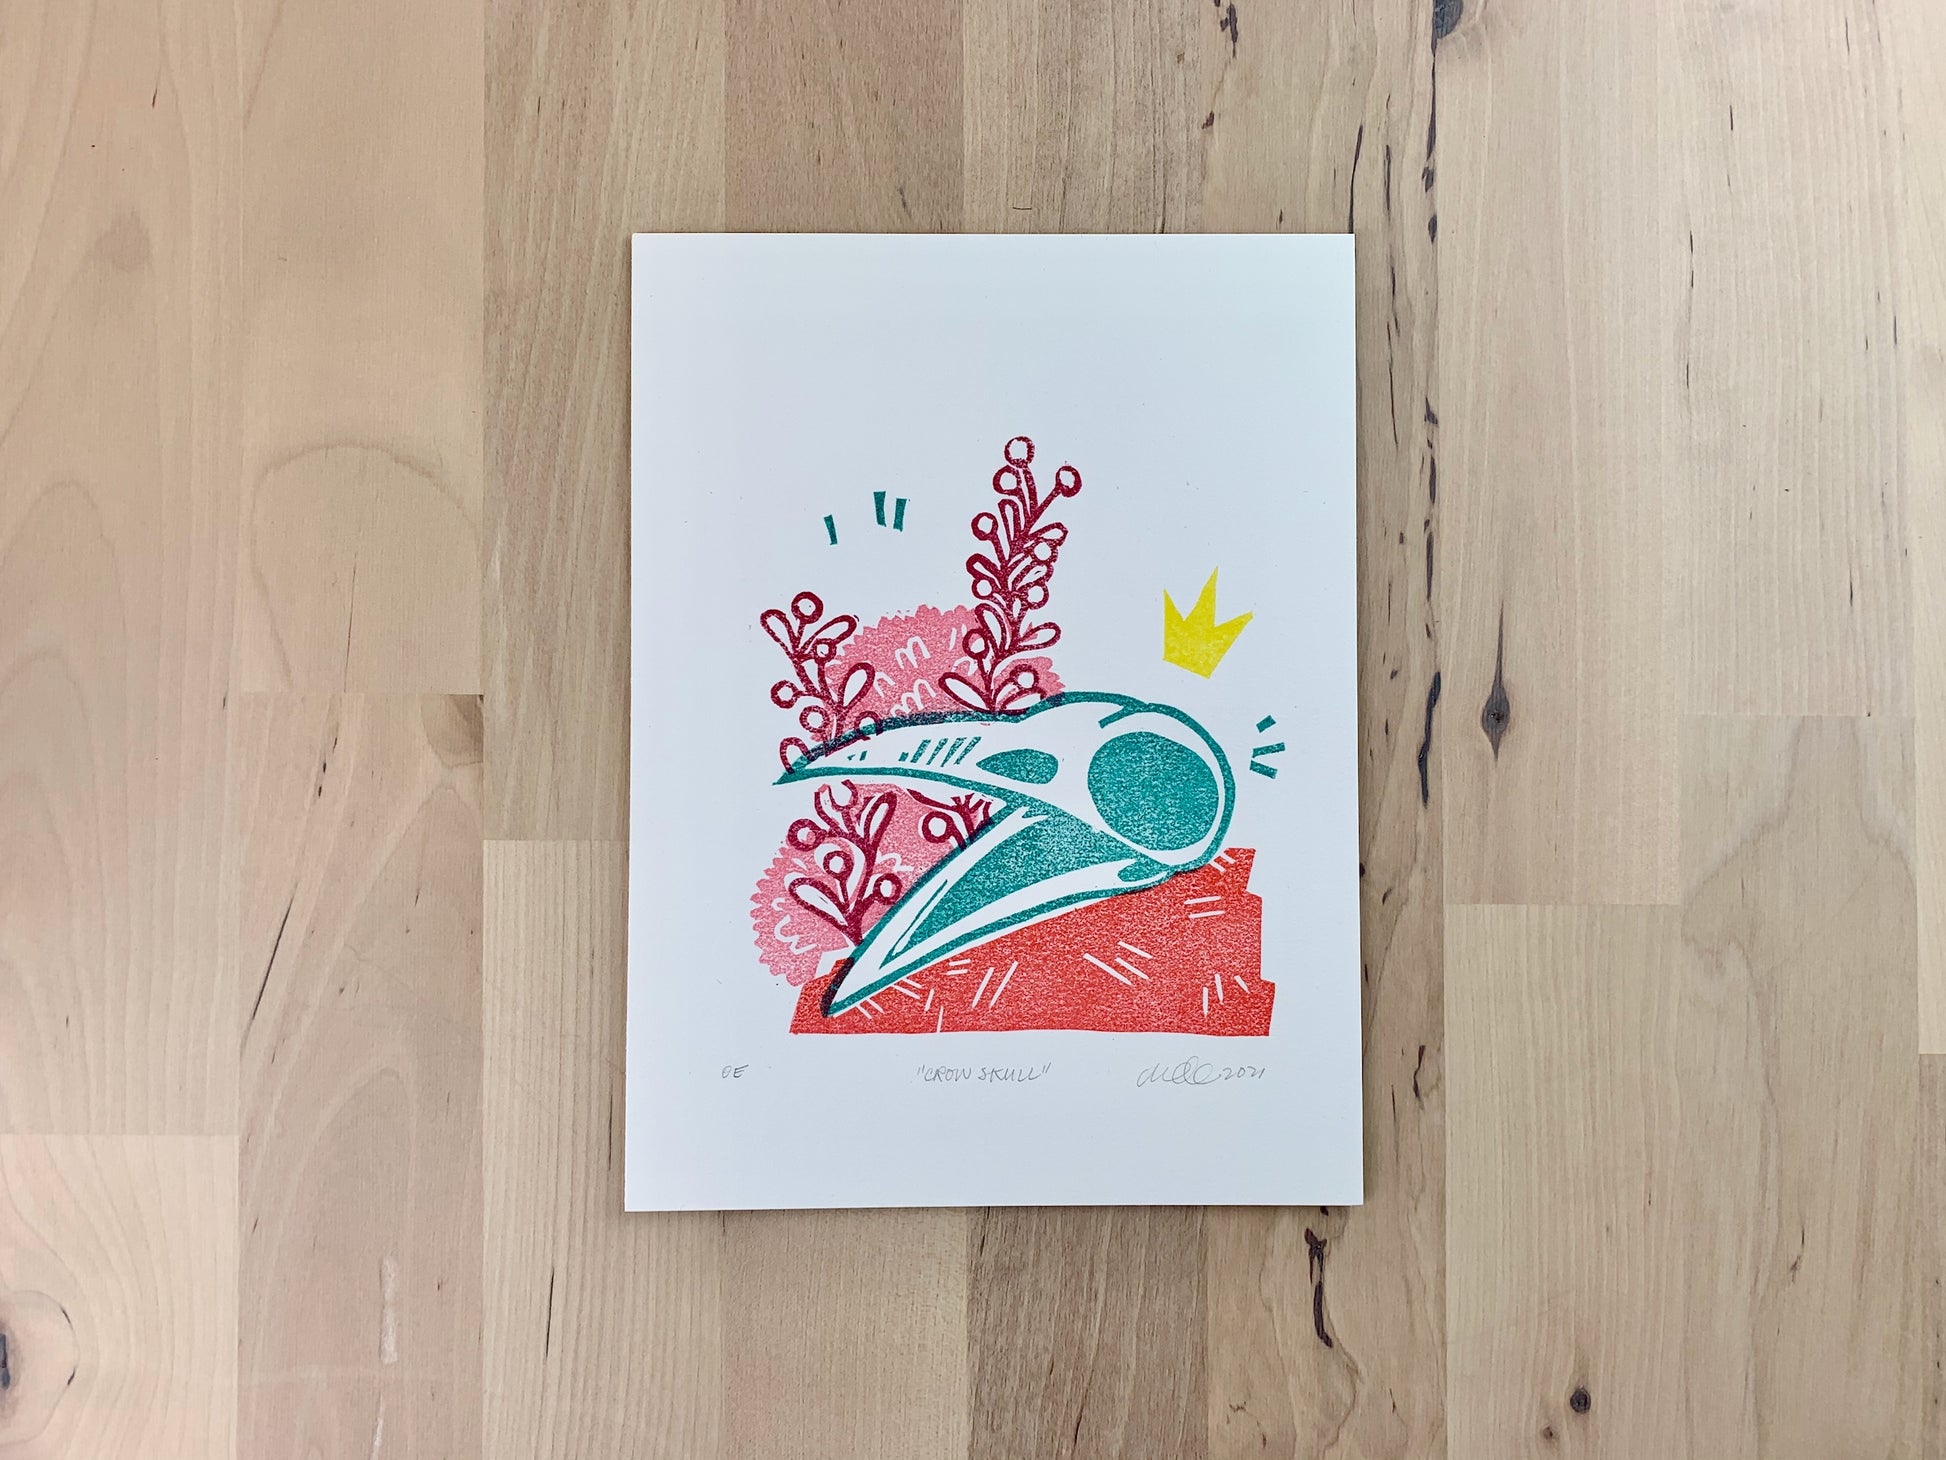 Original art print by Amber Orenstein. A relief print of a crow skull with crown and floral accents.